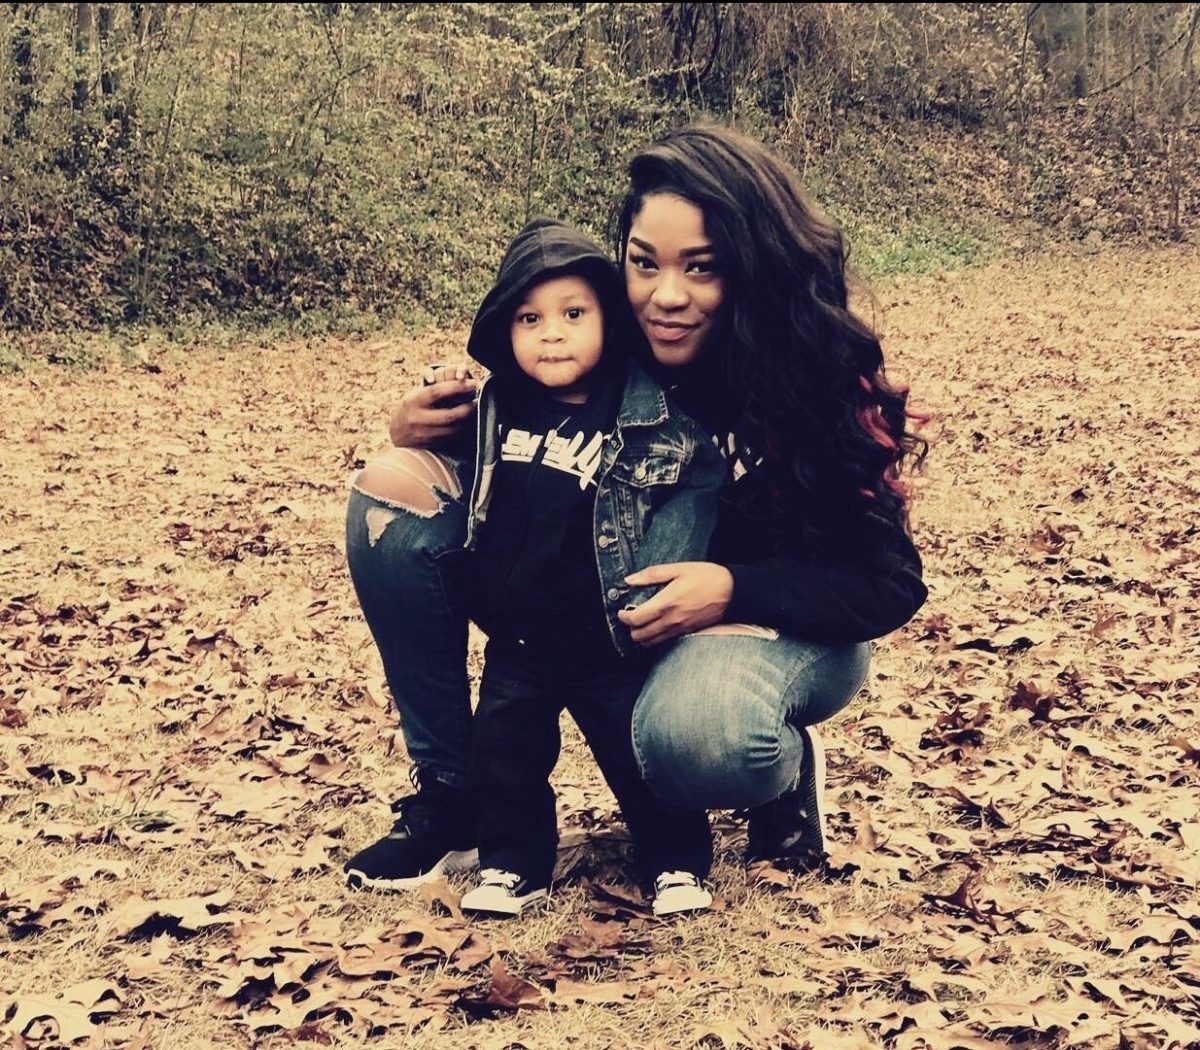 Photo of Nija Guider, one of the plaintiffs, with her son